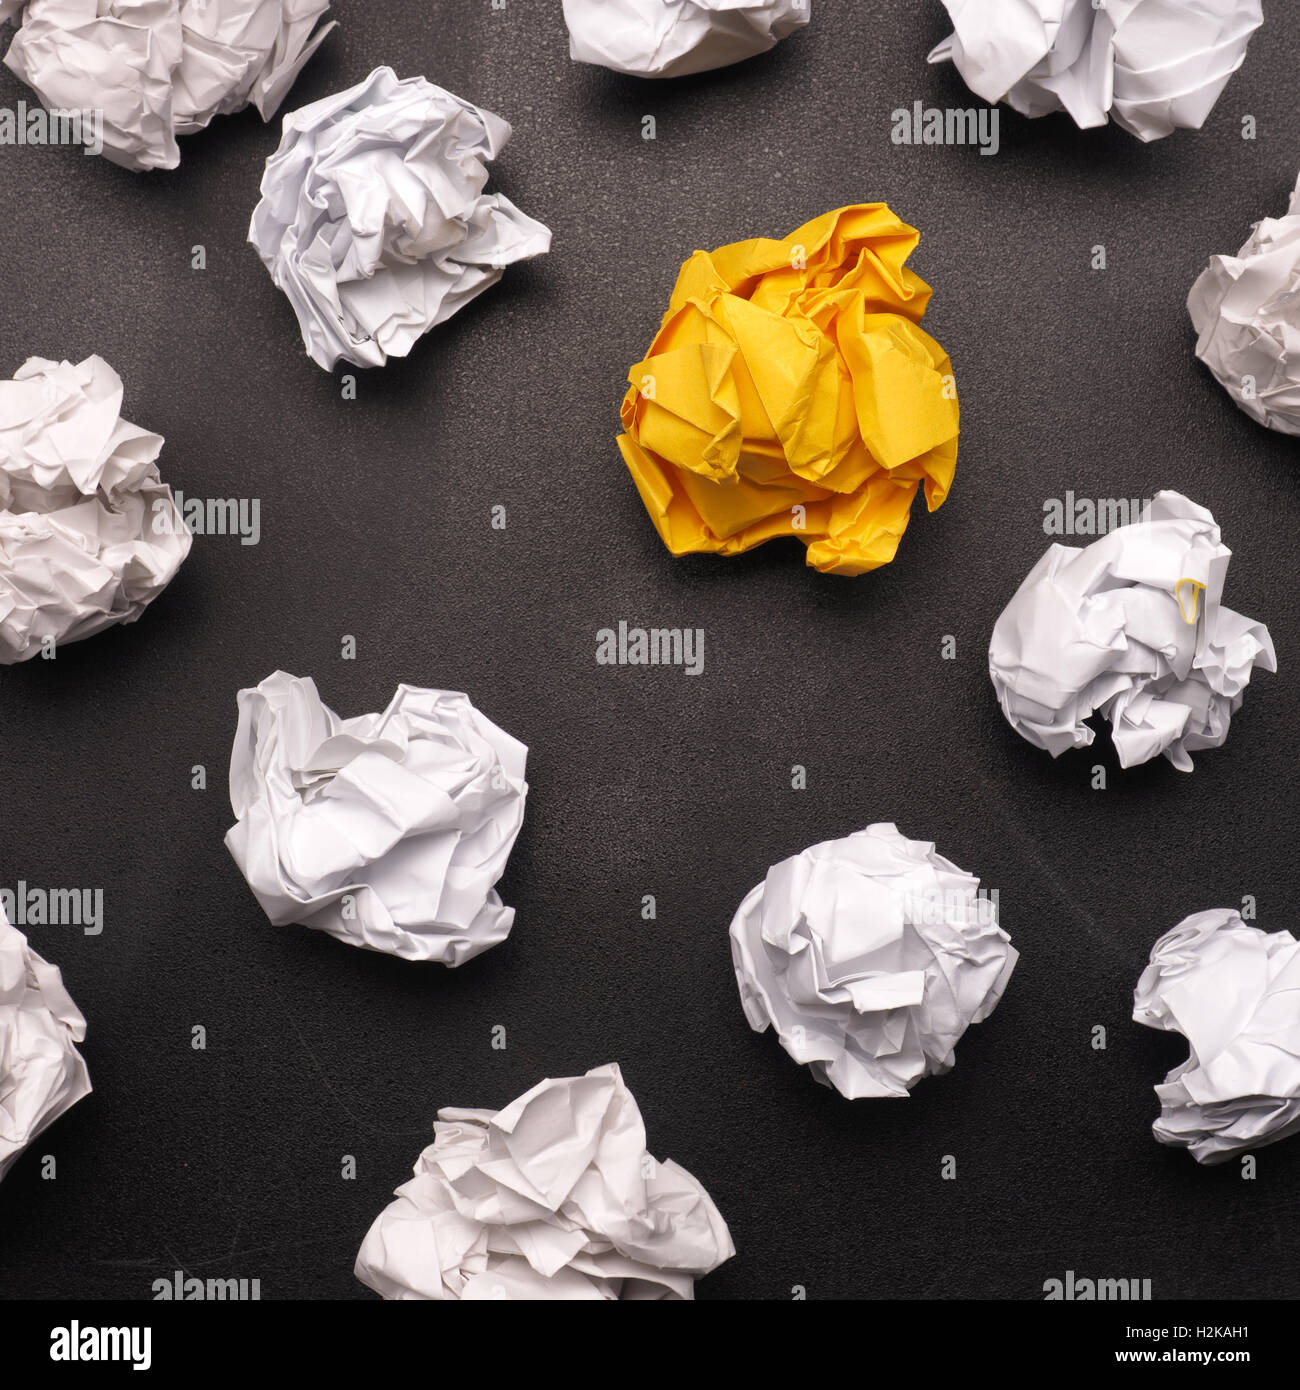 Crumpled paper as symbol of new great ideas Stock Photo